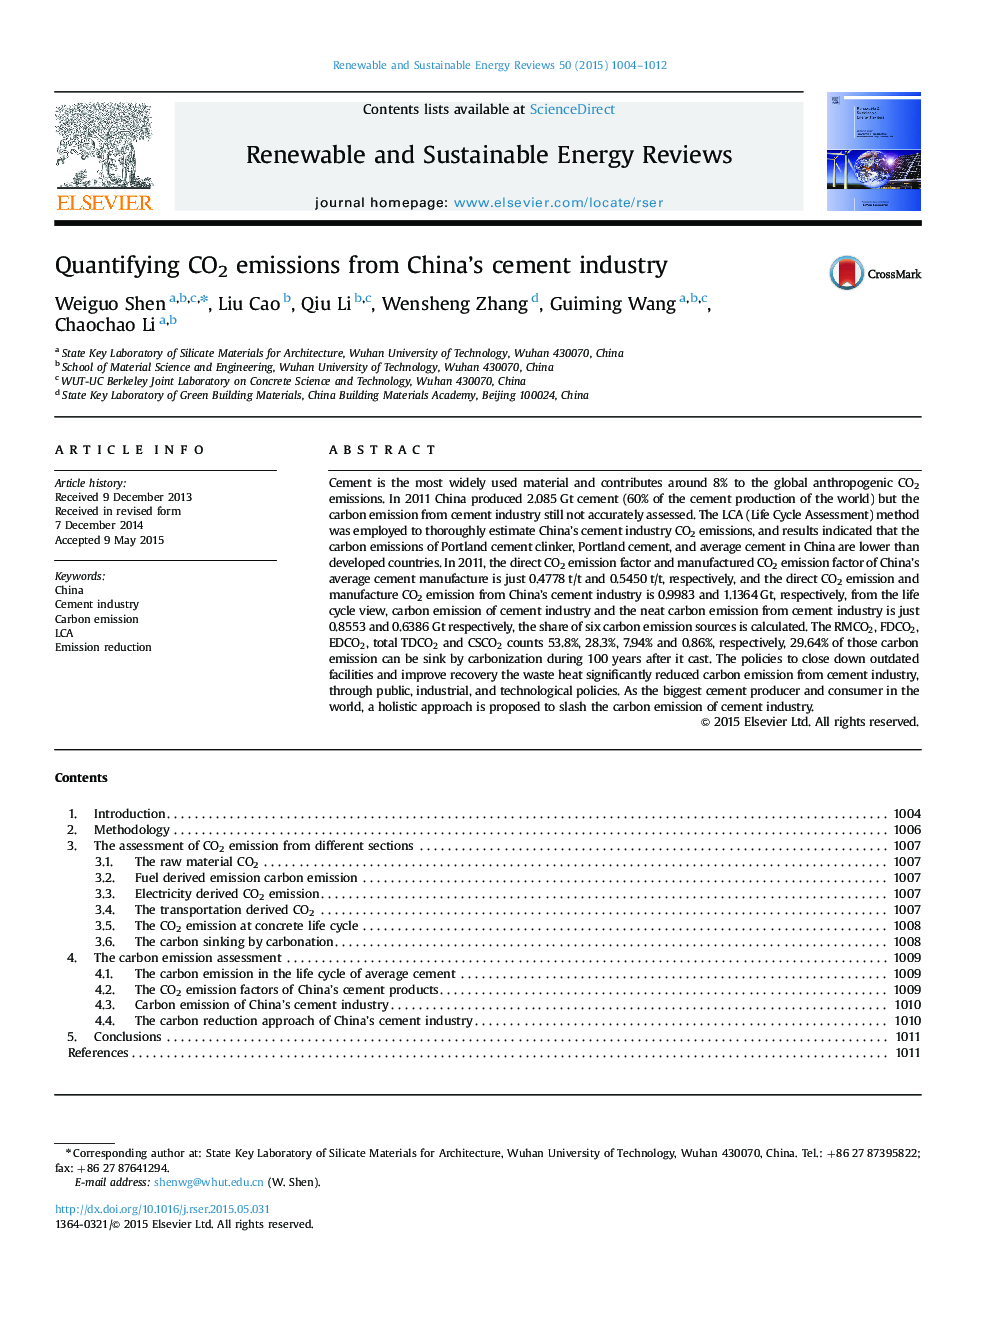 Quantifying CO2 emissions from China's cement industry